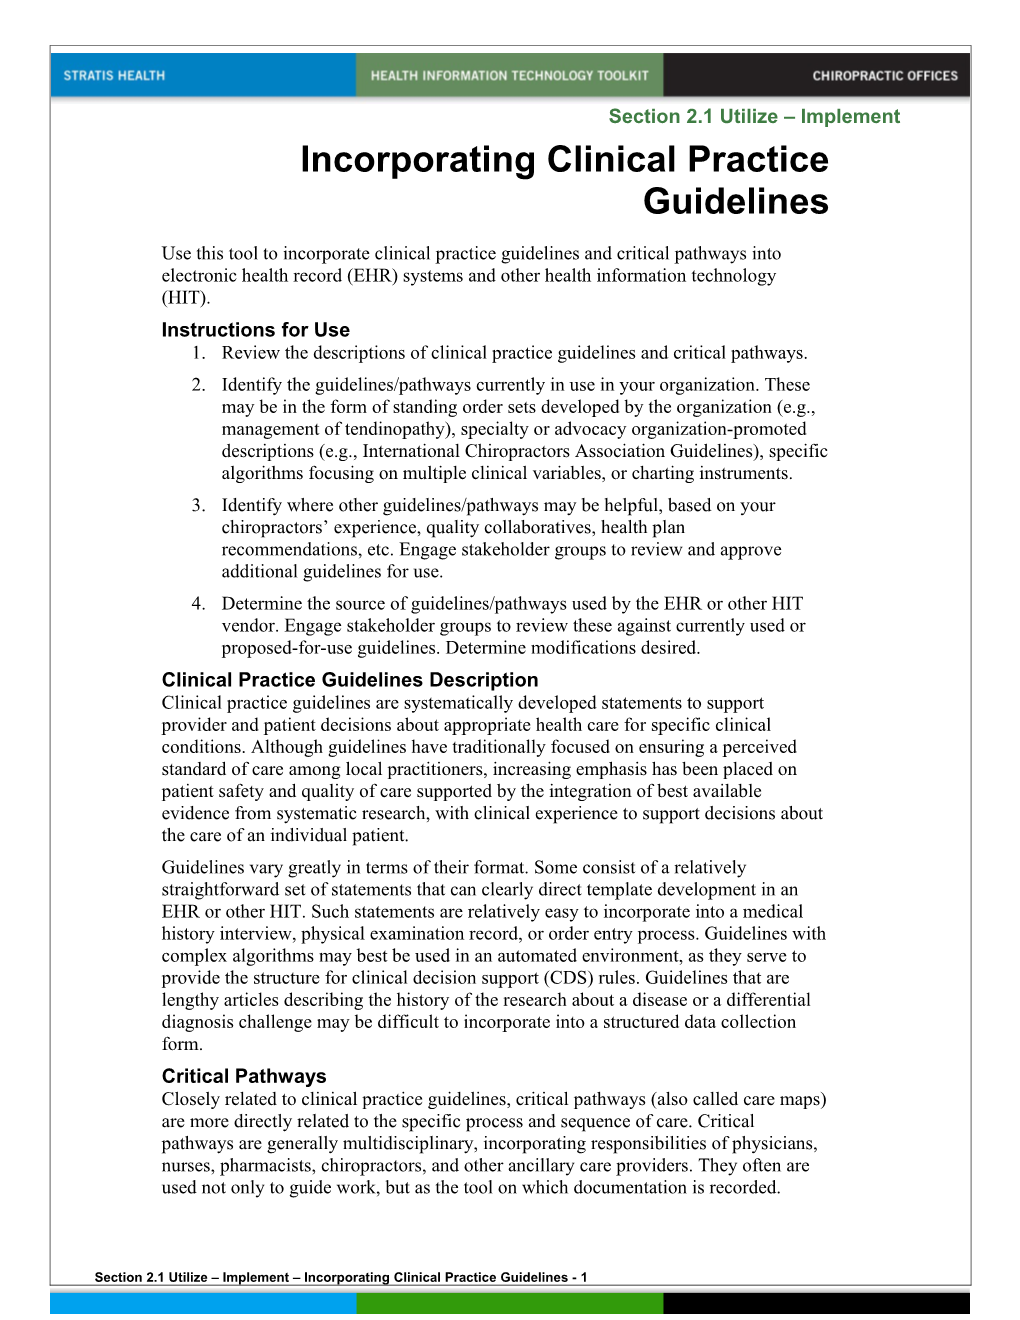 2.1 Incorporating Clinical Practice Guidelines